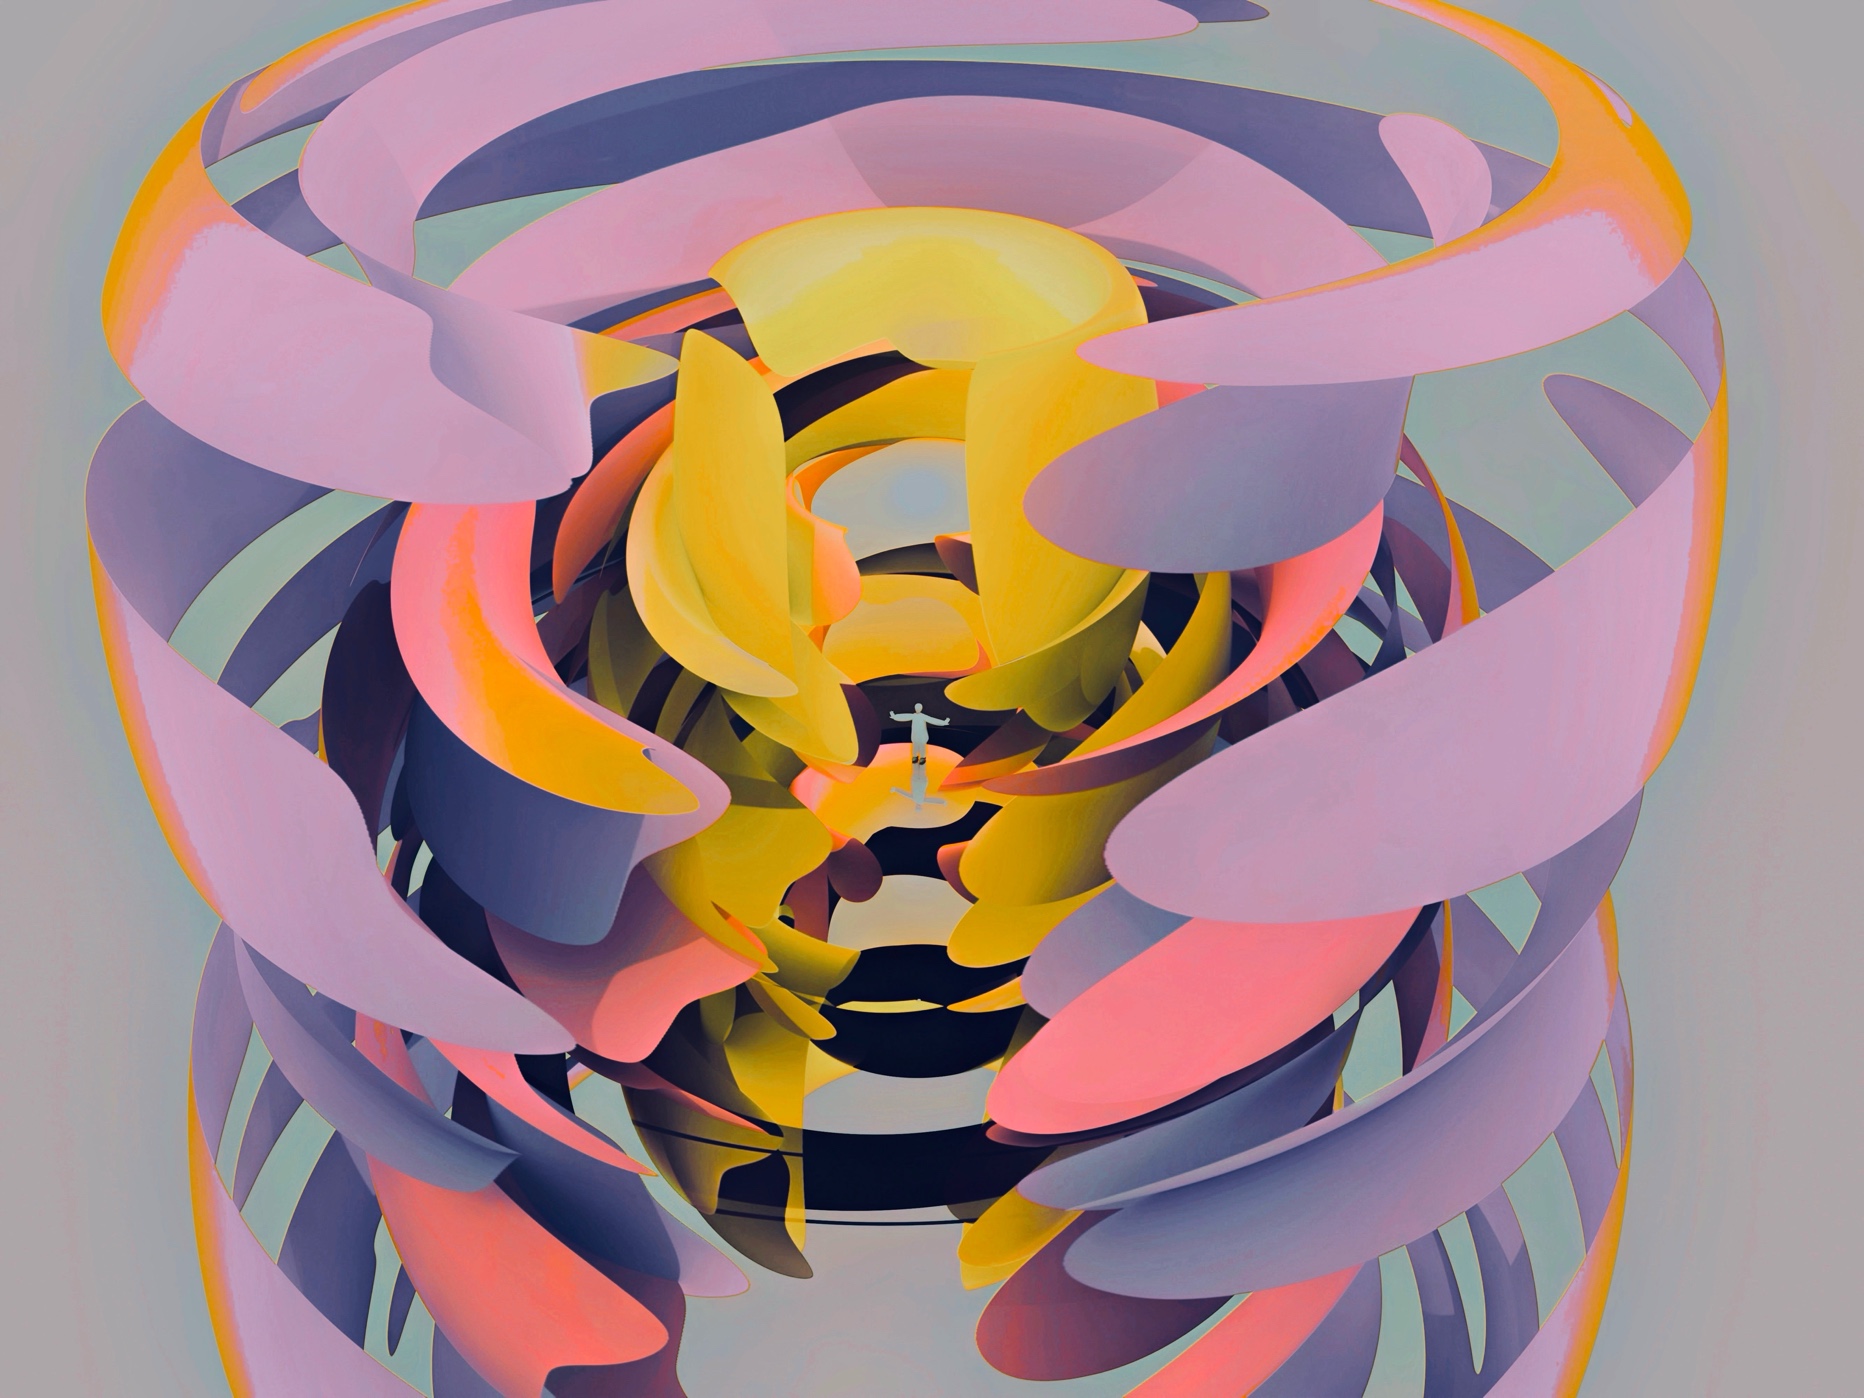 This is an image of Atsushigraph's work Buffer. It depicts purple, yellow, and pale pink bands wrapping around a person standing in the center.